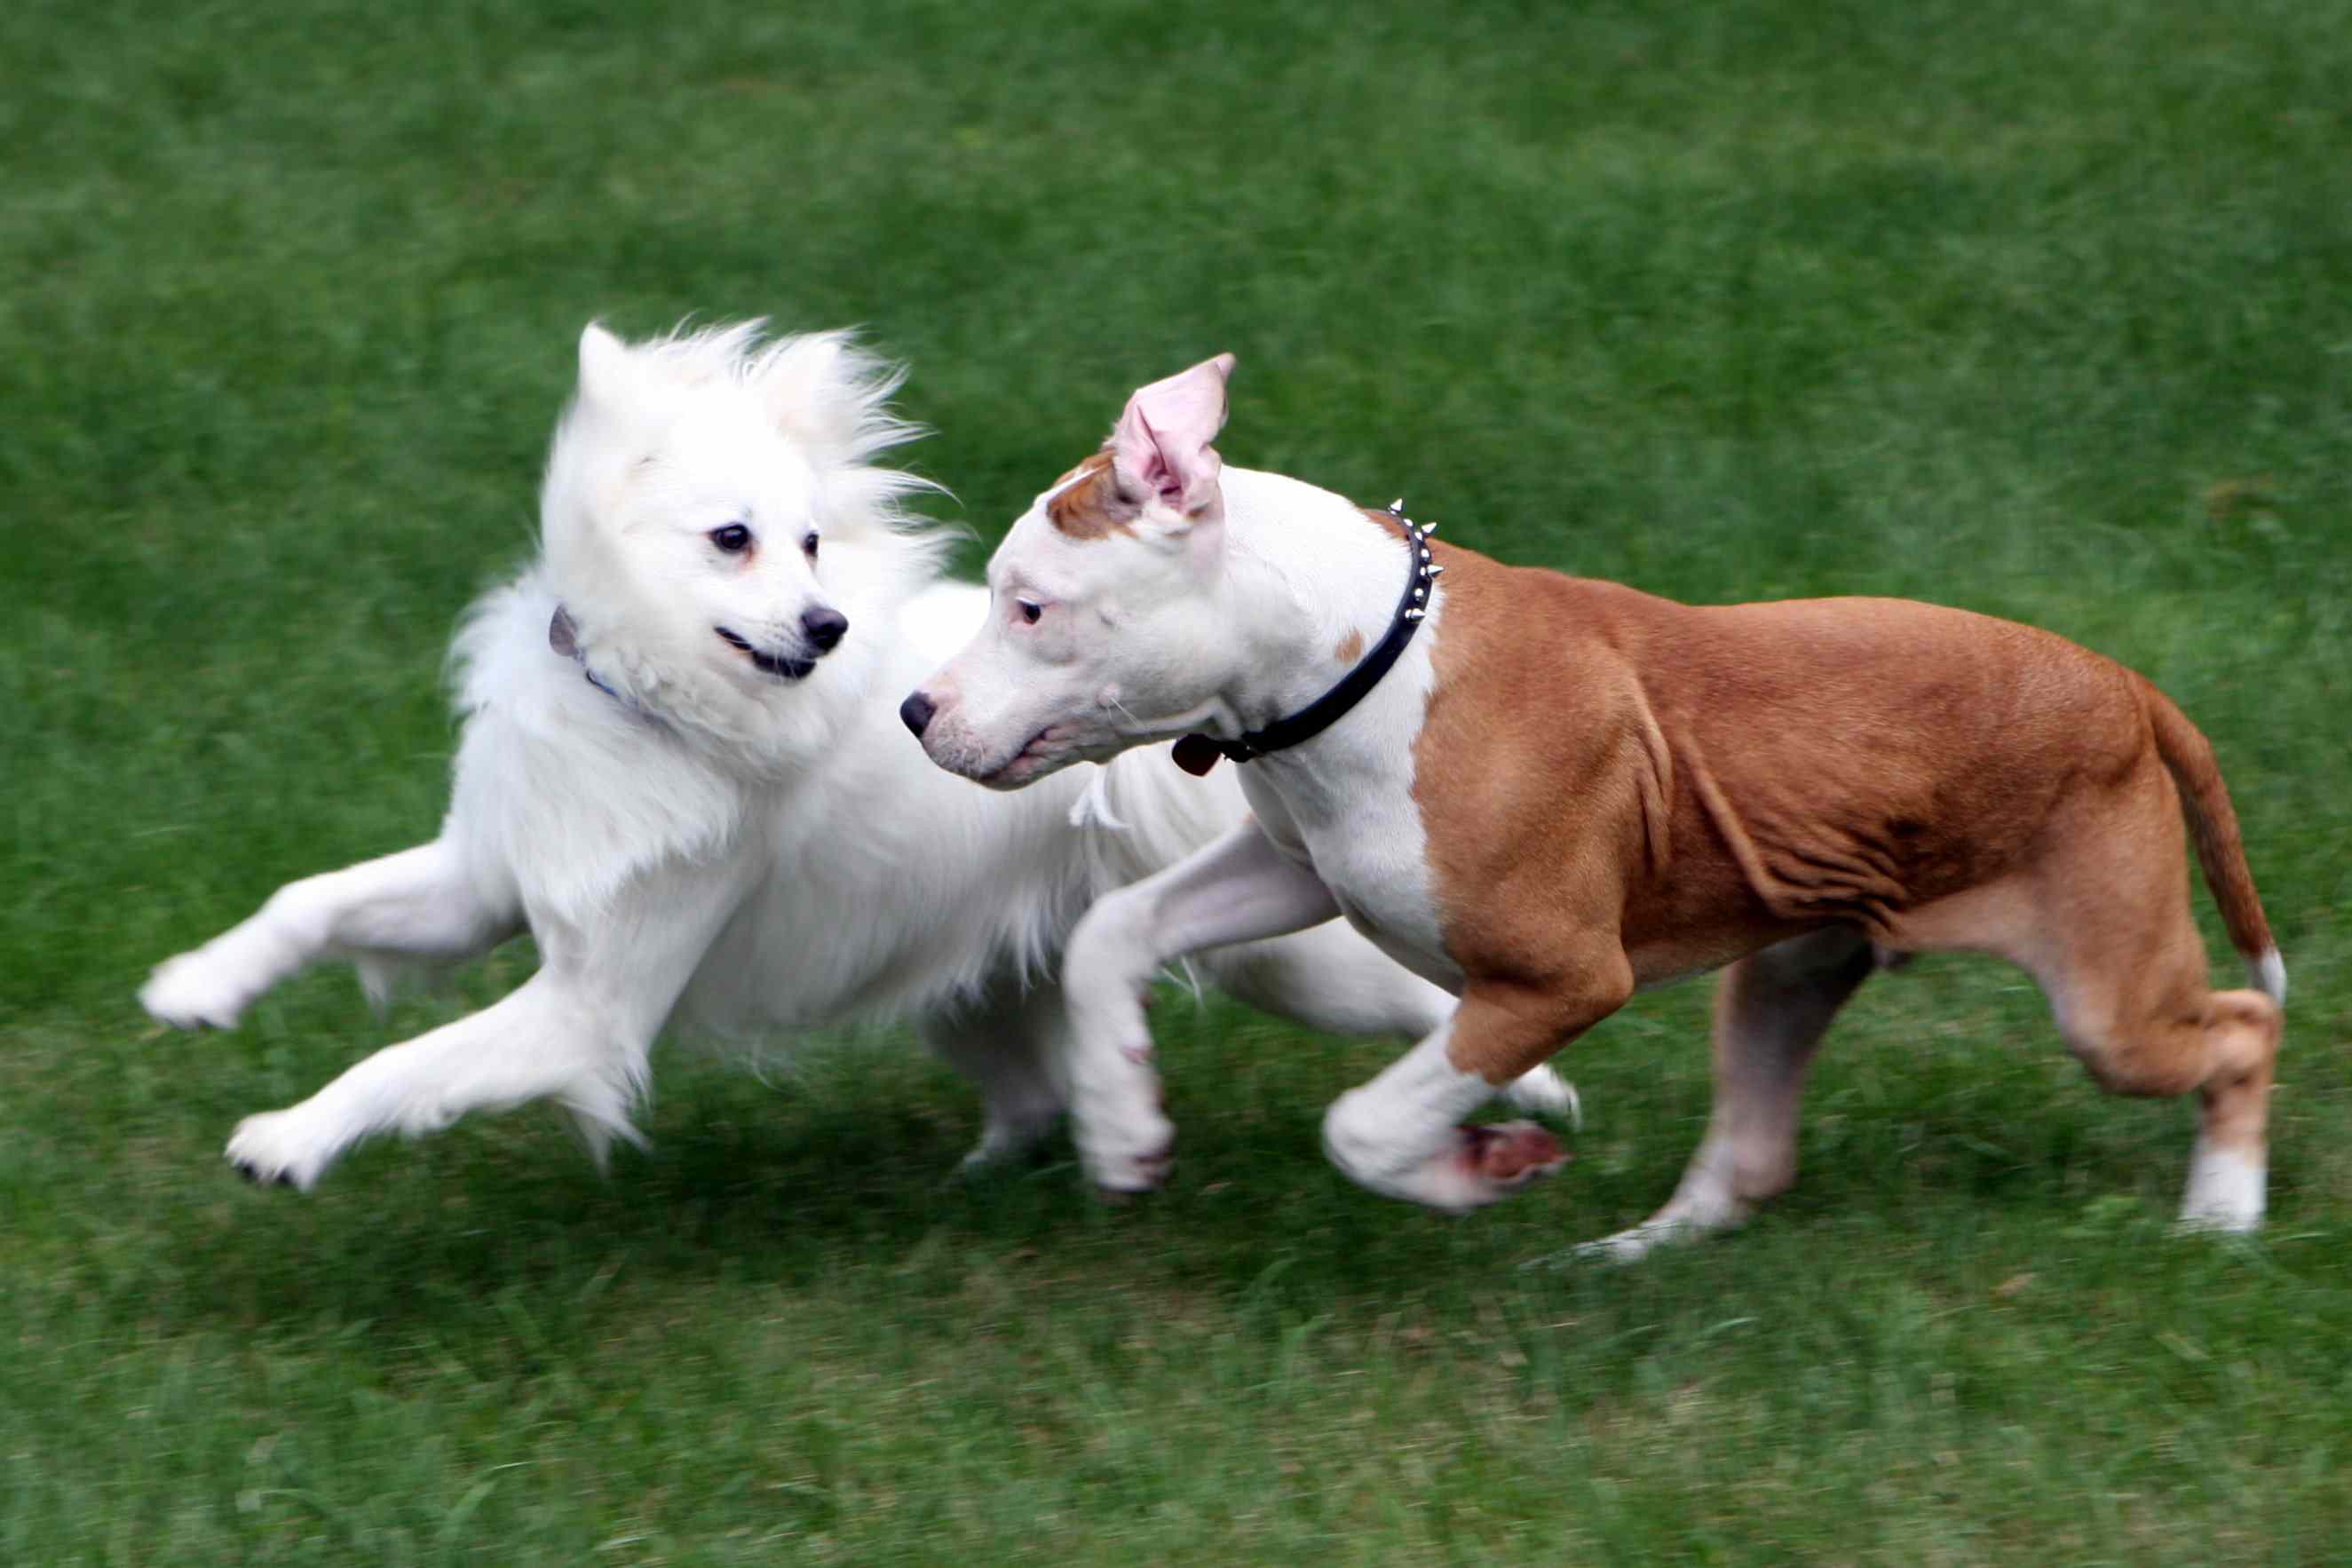 Two dogs An American Eskimo breed and Bull Terrier puppy playing in the grass